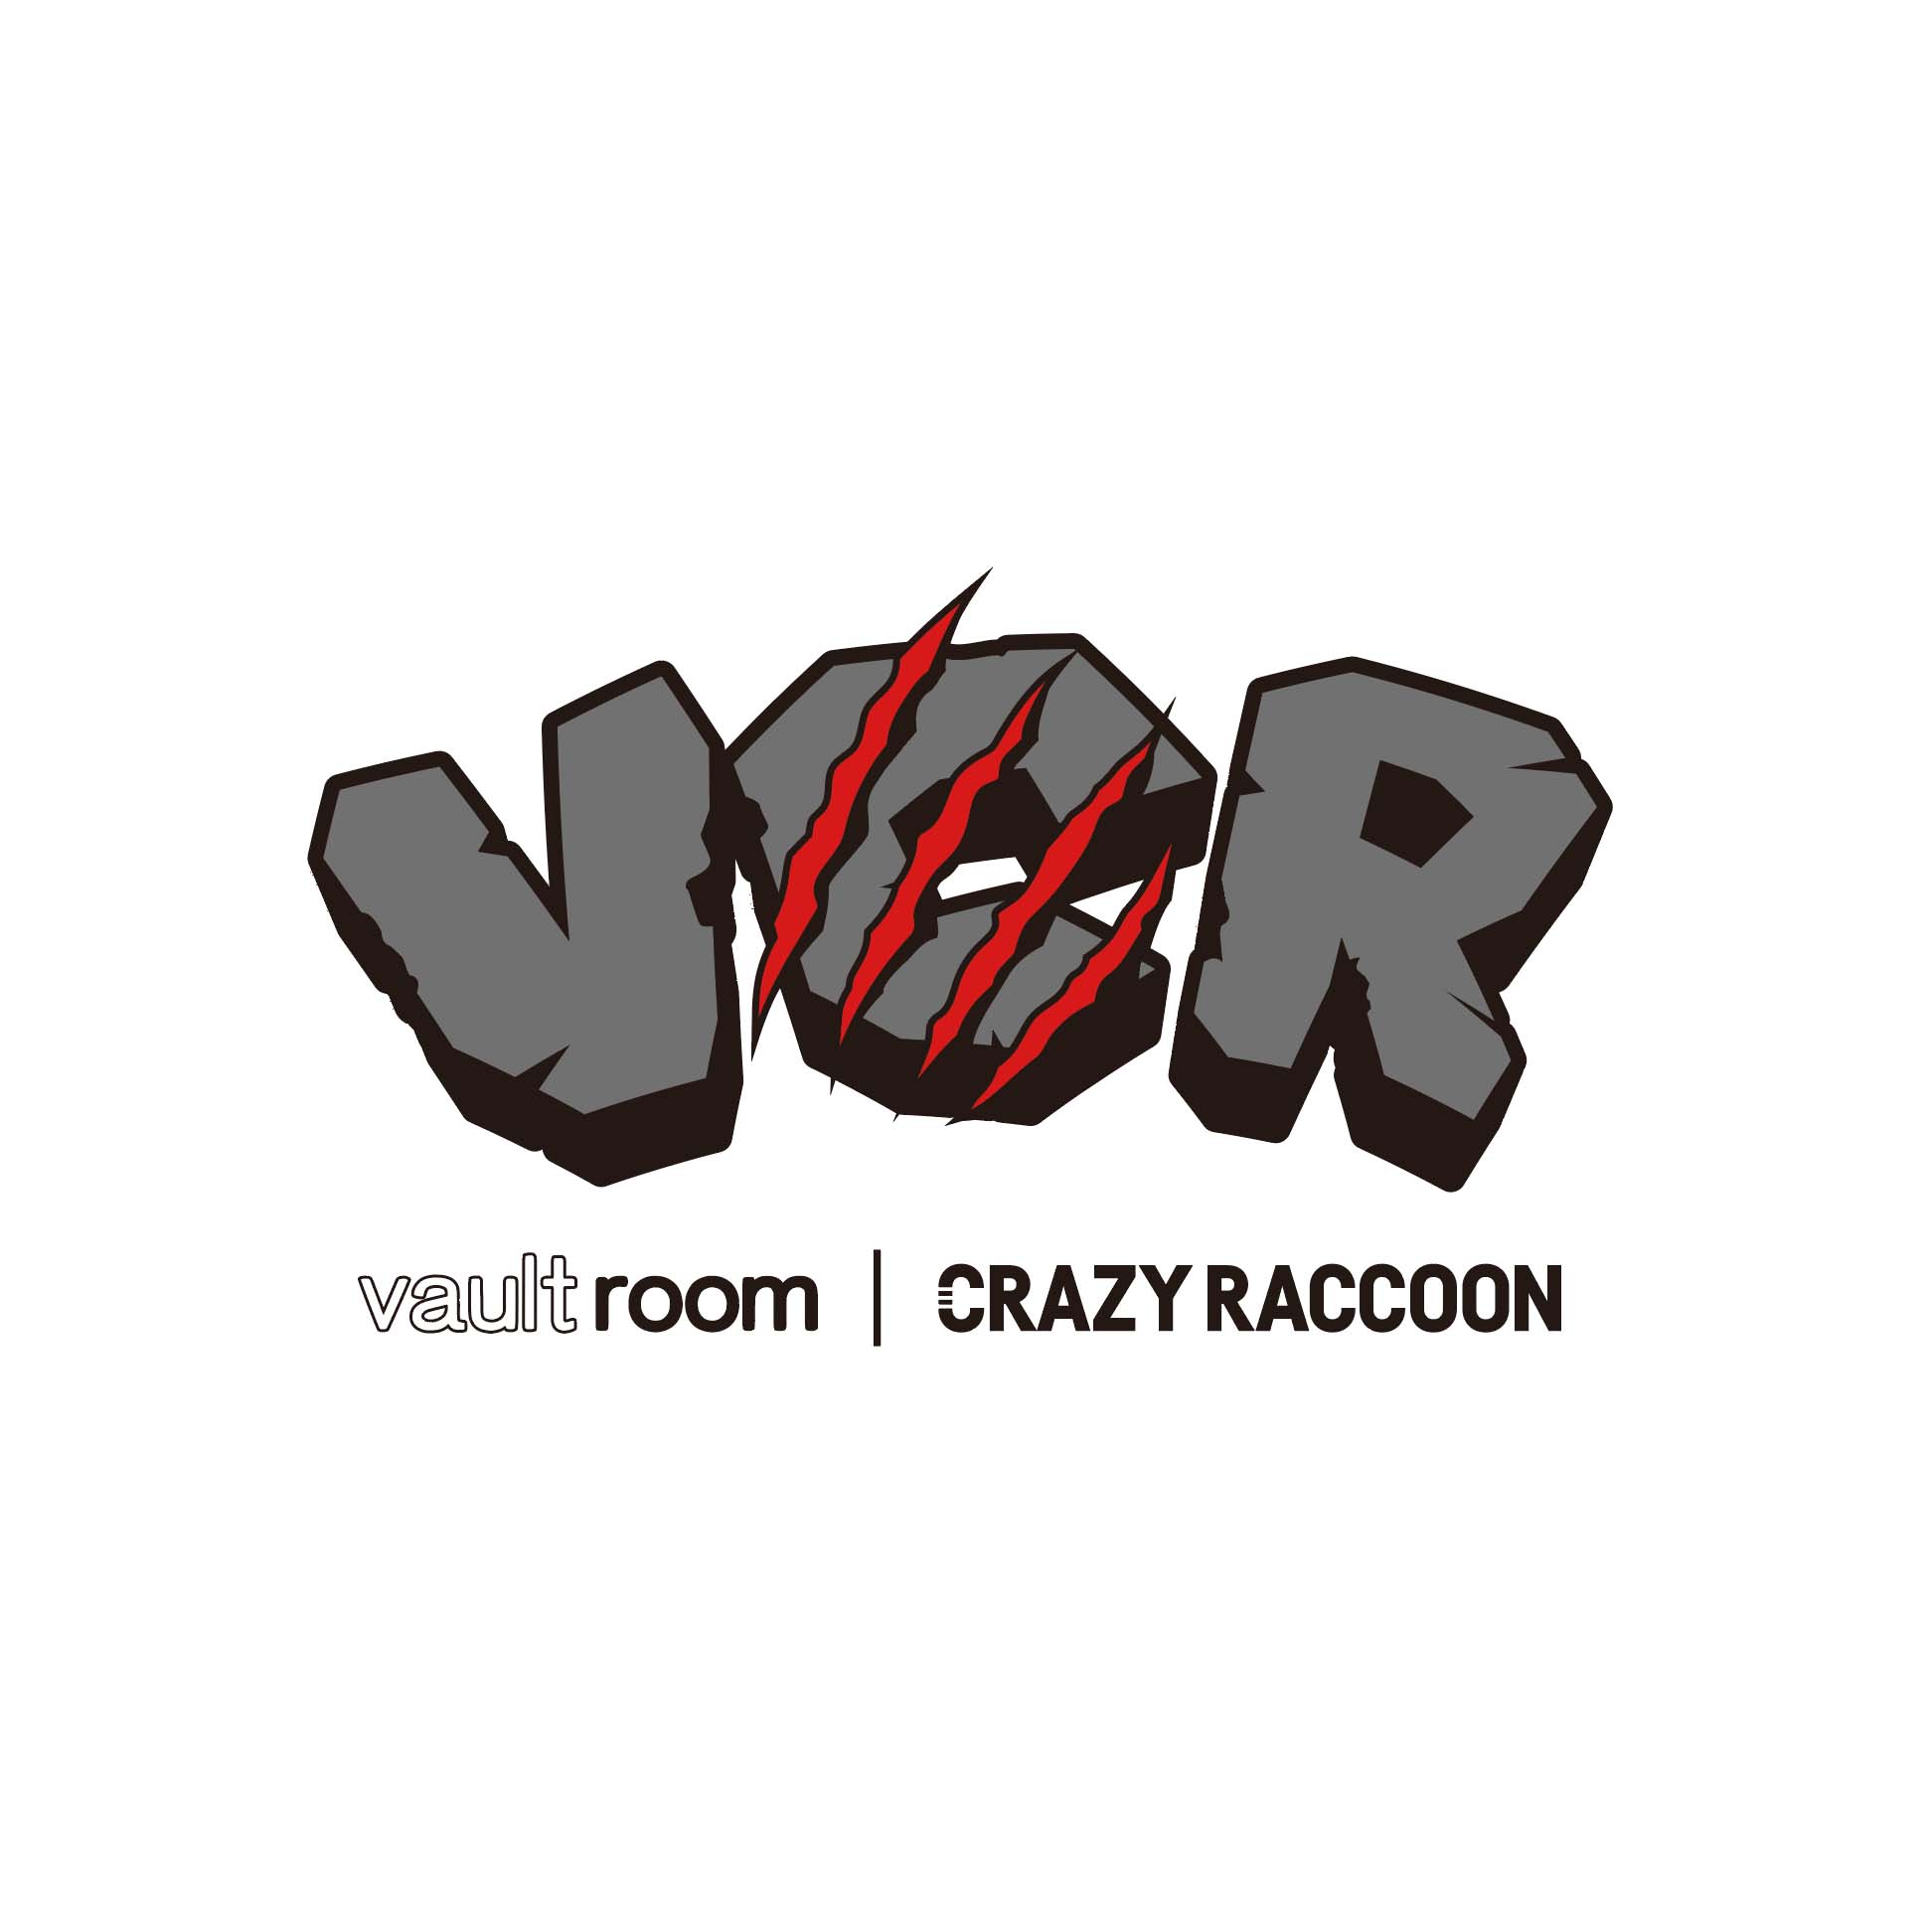 VCR MEMORY 2nd – VAULTROOM